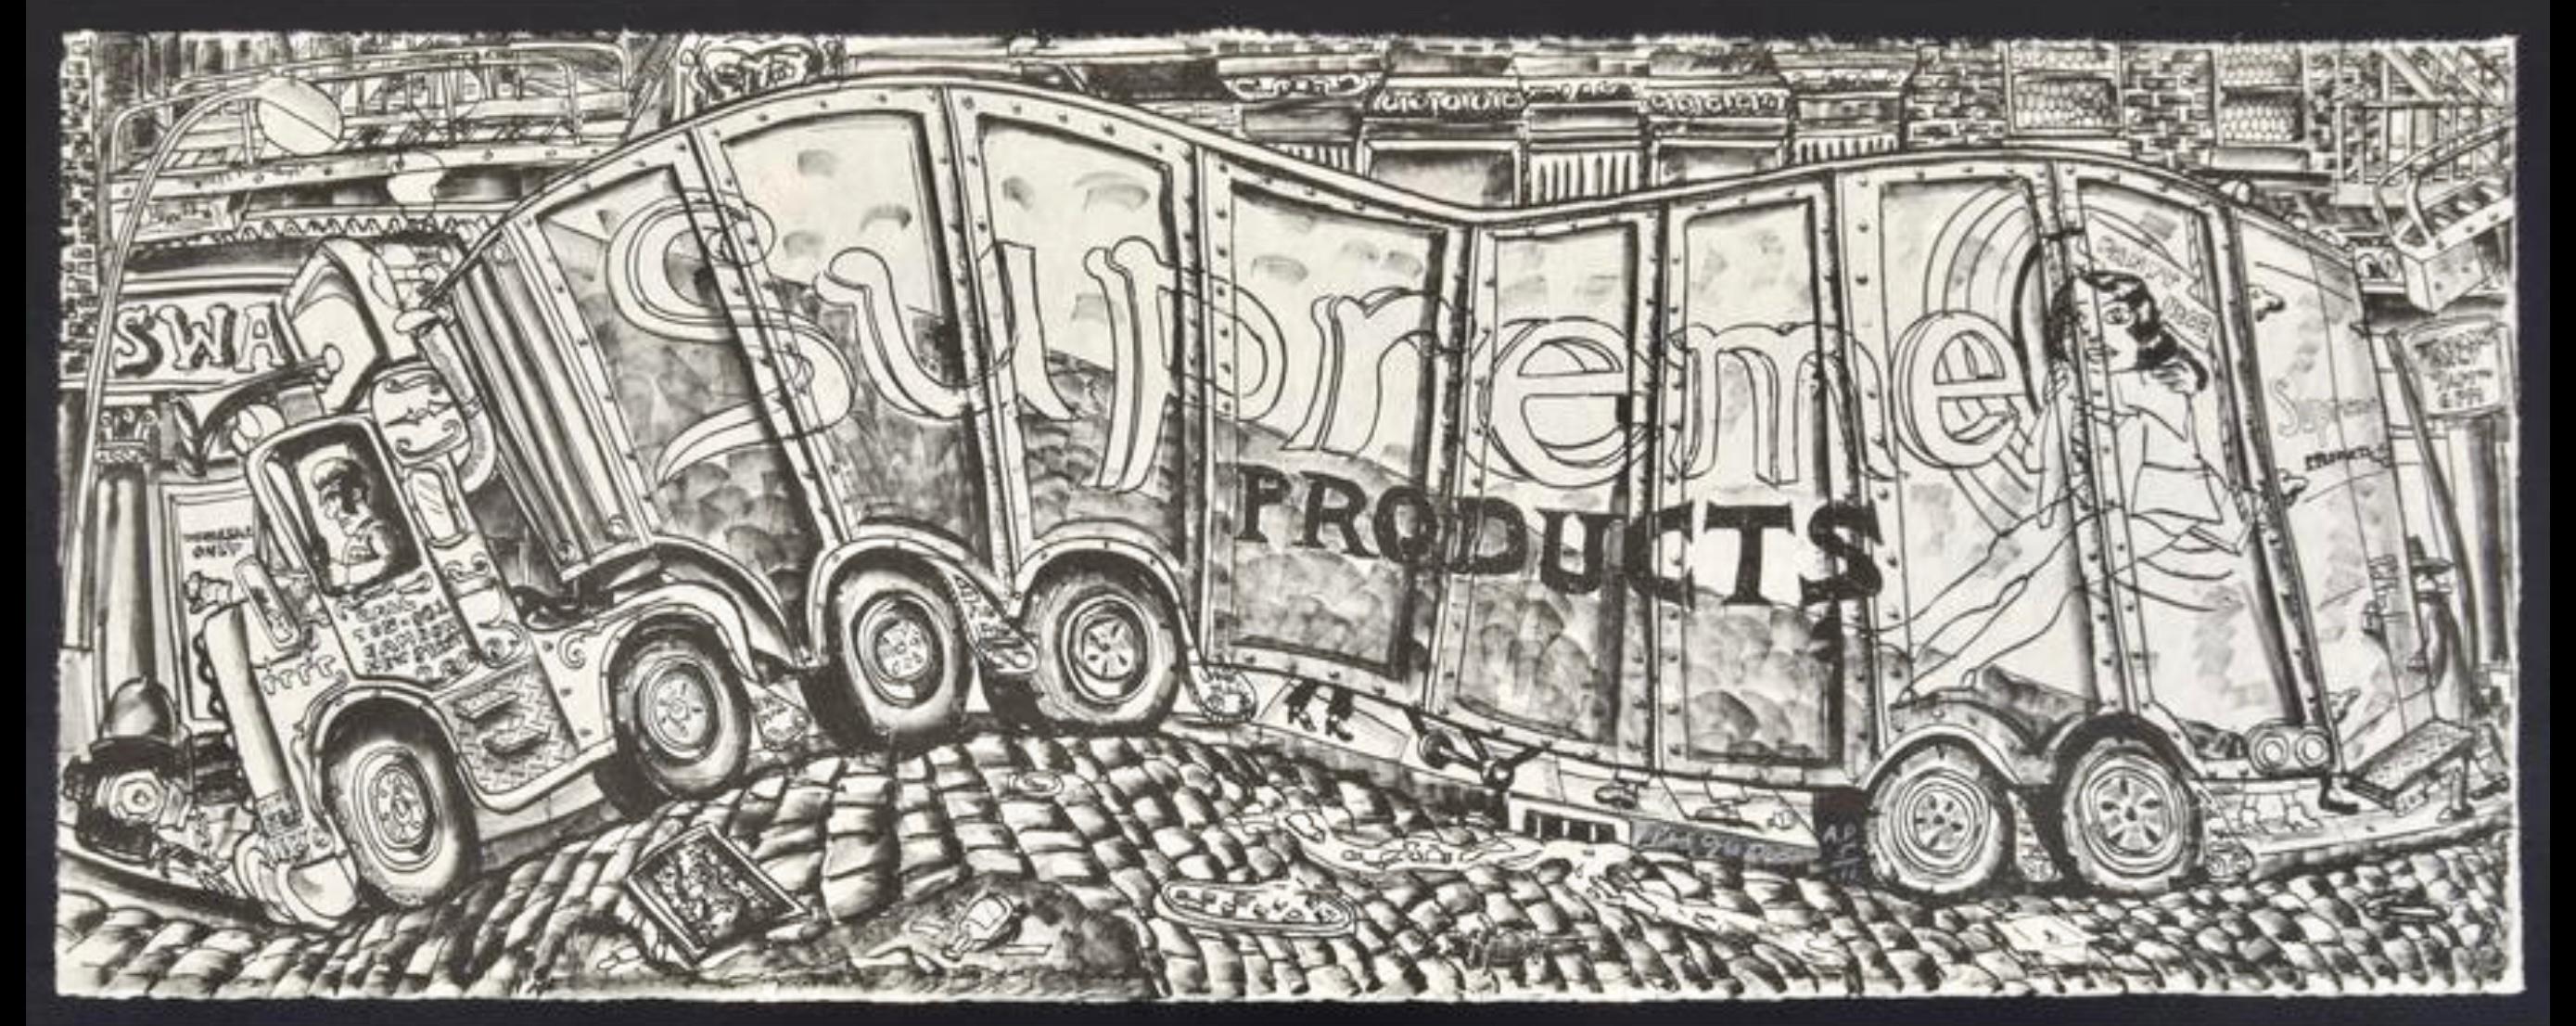 Truck I (VEL 105; Knestrick 77) - Print by Red Grooms